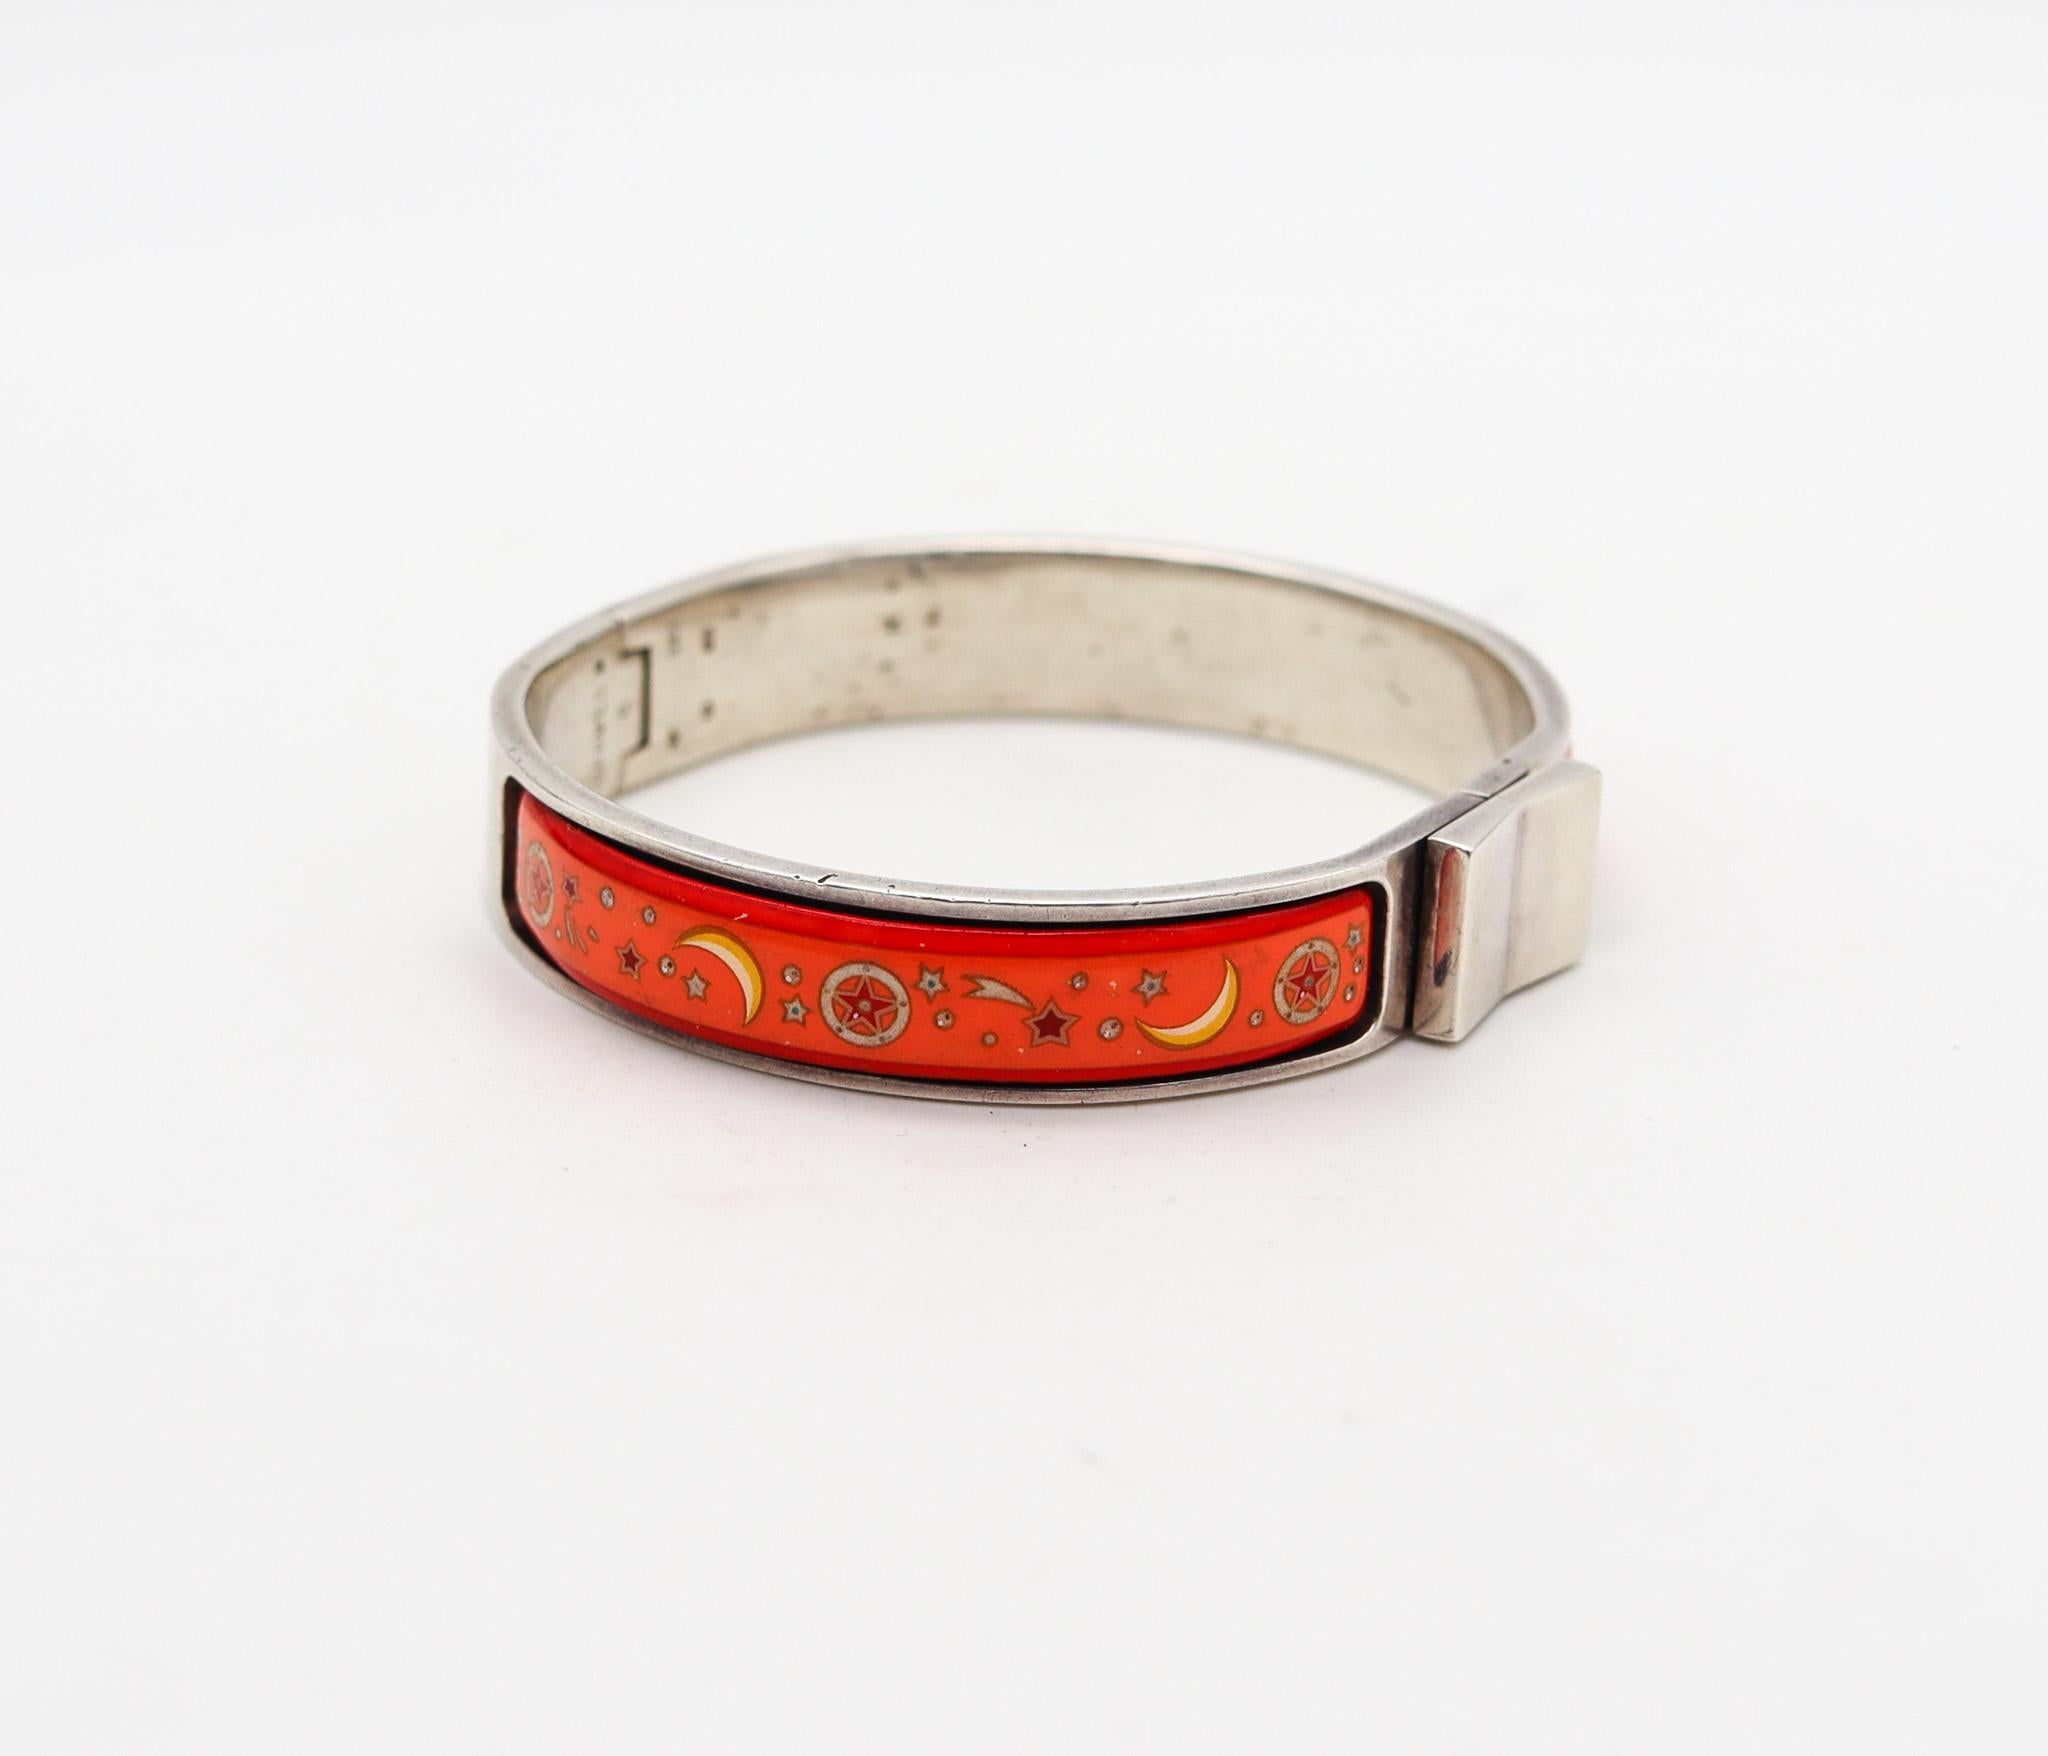 Hermes Paris 1990 Clic Clac Bangle Bracelet In .925 Sterling Silver With Enamel For Sale 1